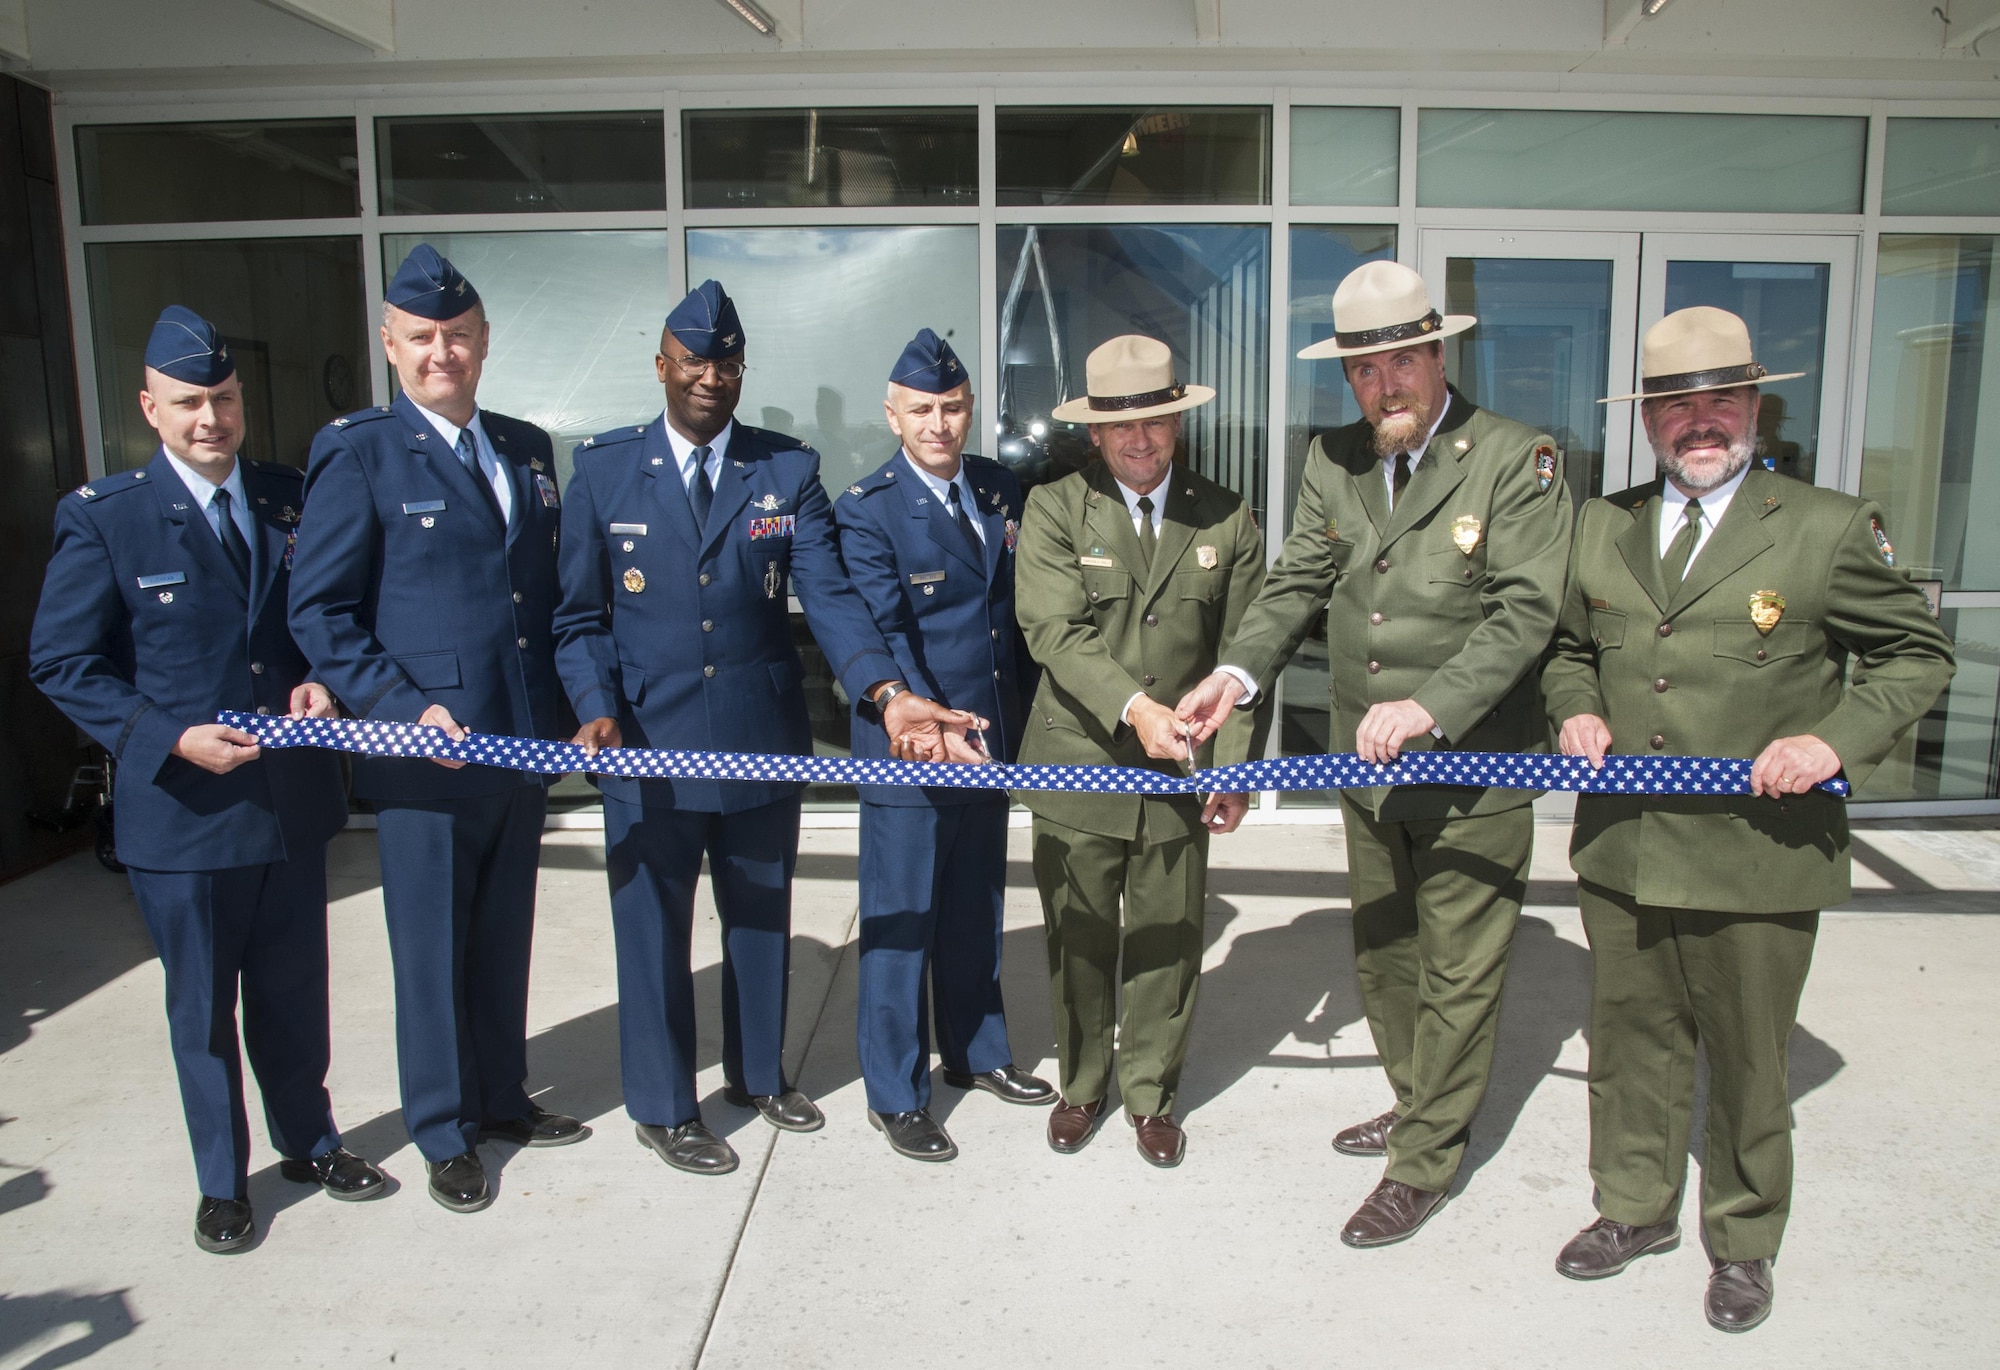 Leaders from Air Force Global Strike Command and 20th Air Force perform a ribbon-cutting ceremony with National park rangers celebrating the grand opening of the new Minuteman Missile National Historic Site visitor center in Philip, S.D. on Sept. 24, 2016. The visitor center helps recognize nuclear missile silos that were strategically placed throughout the Great Plains during the heat of the Cold War to maintain peace and prevent war. (U.S Air Force photo by Airman 1st Class Christian Sullivan)   